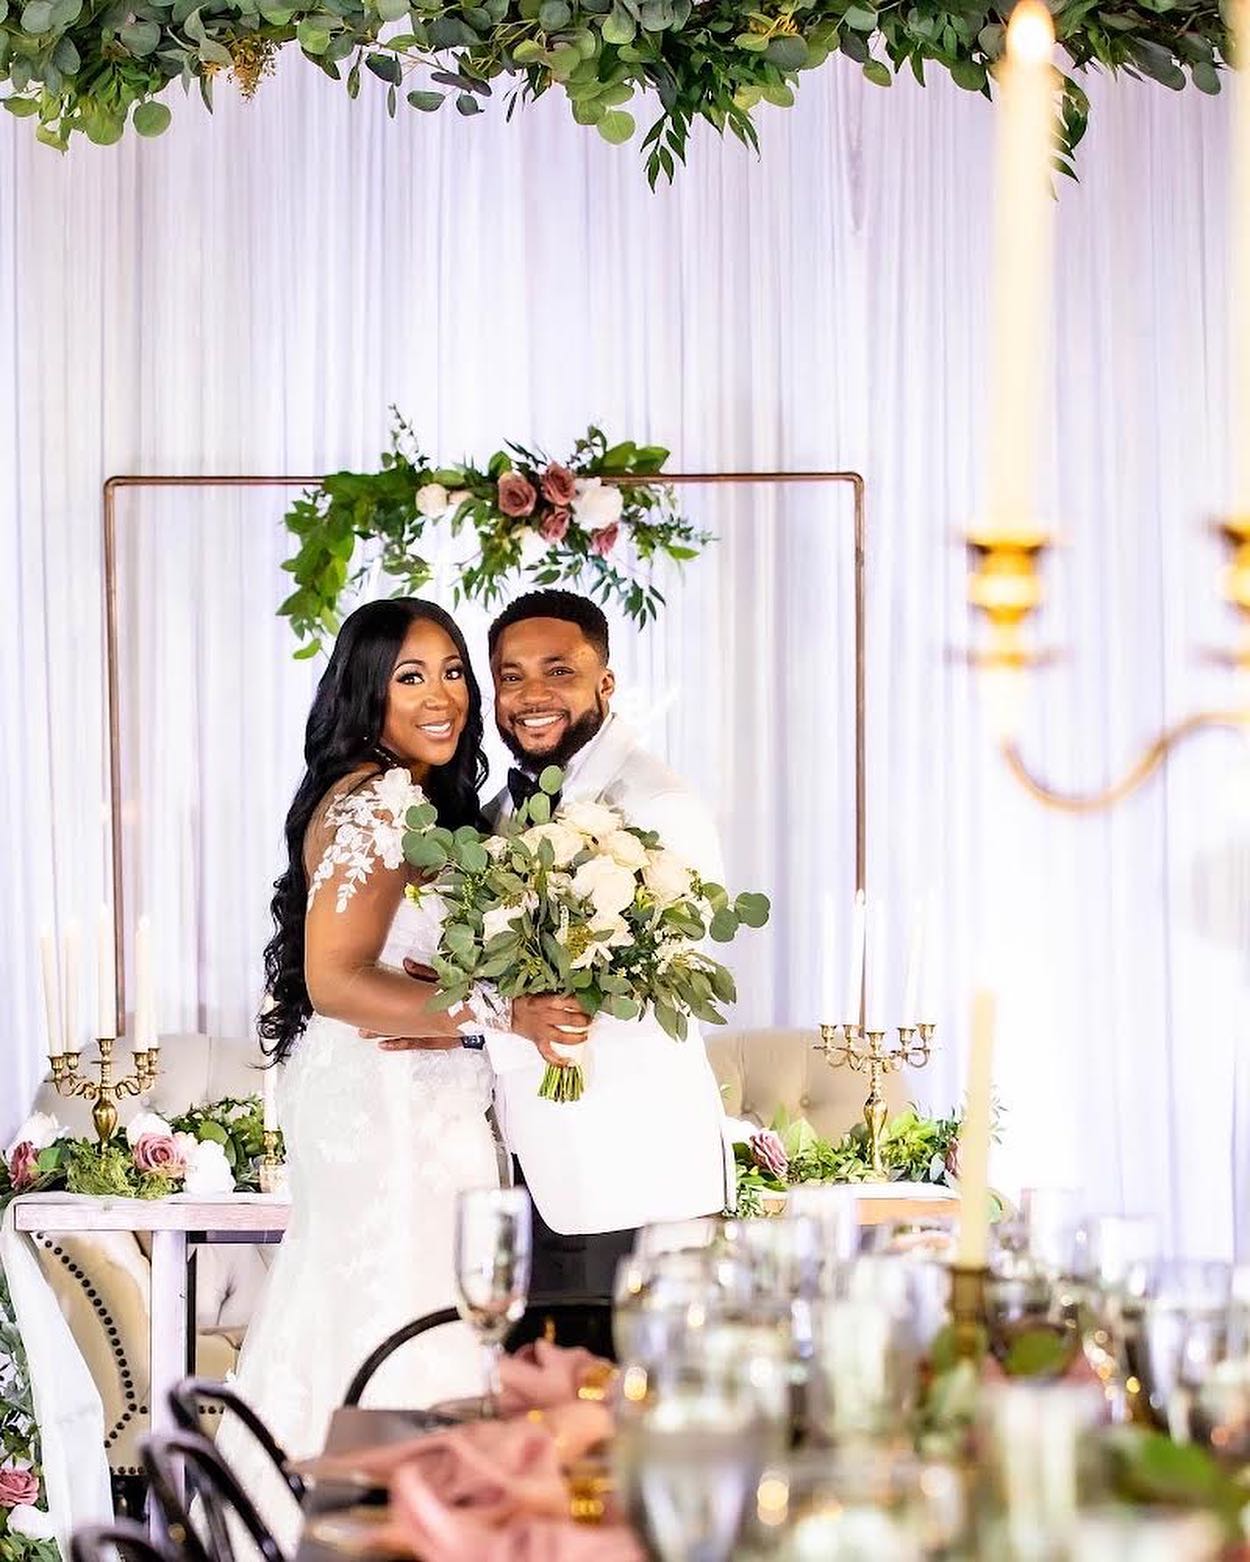 Tim Godfrey Shares Beautiful Photos From His Wedding In The US | Christian Feeds Media